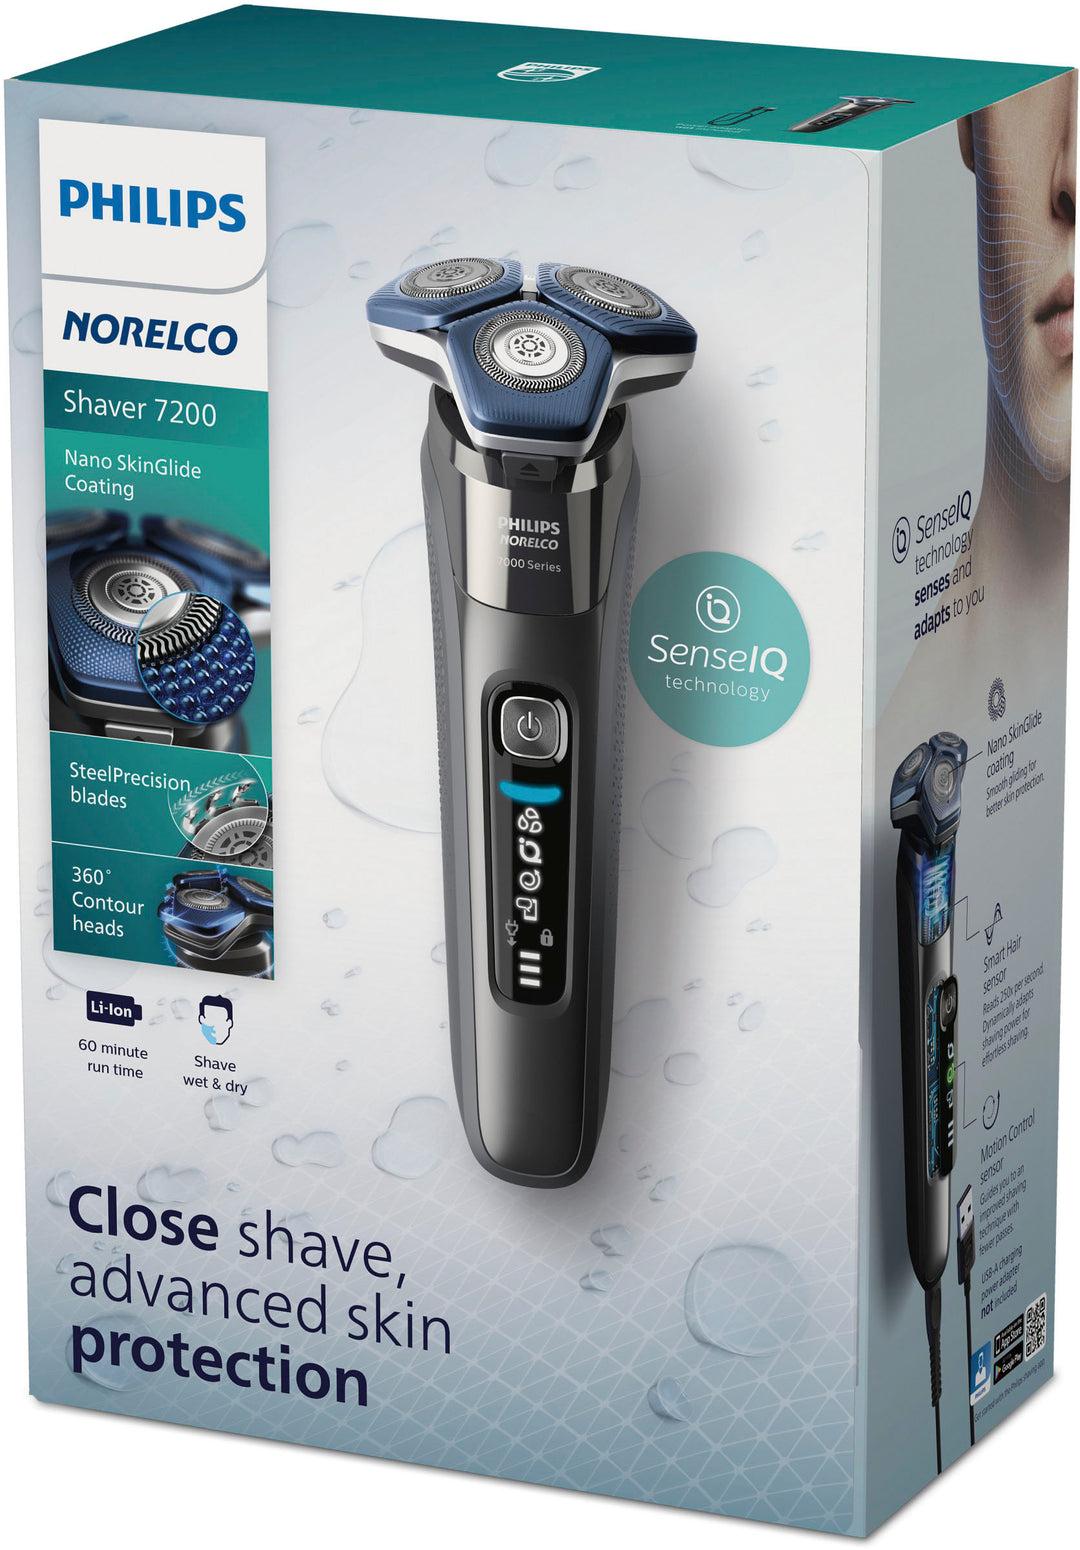 Philips Norelco Shaver 7200, Rechargeable Wet & Dry Electric Shaver with SenseIQ Technology and Pop-up Trimmer S7887/82 - Black_2